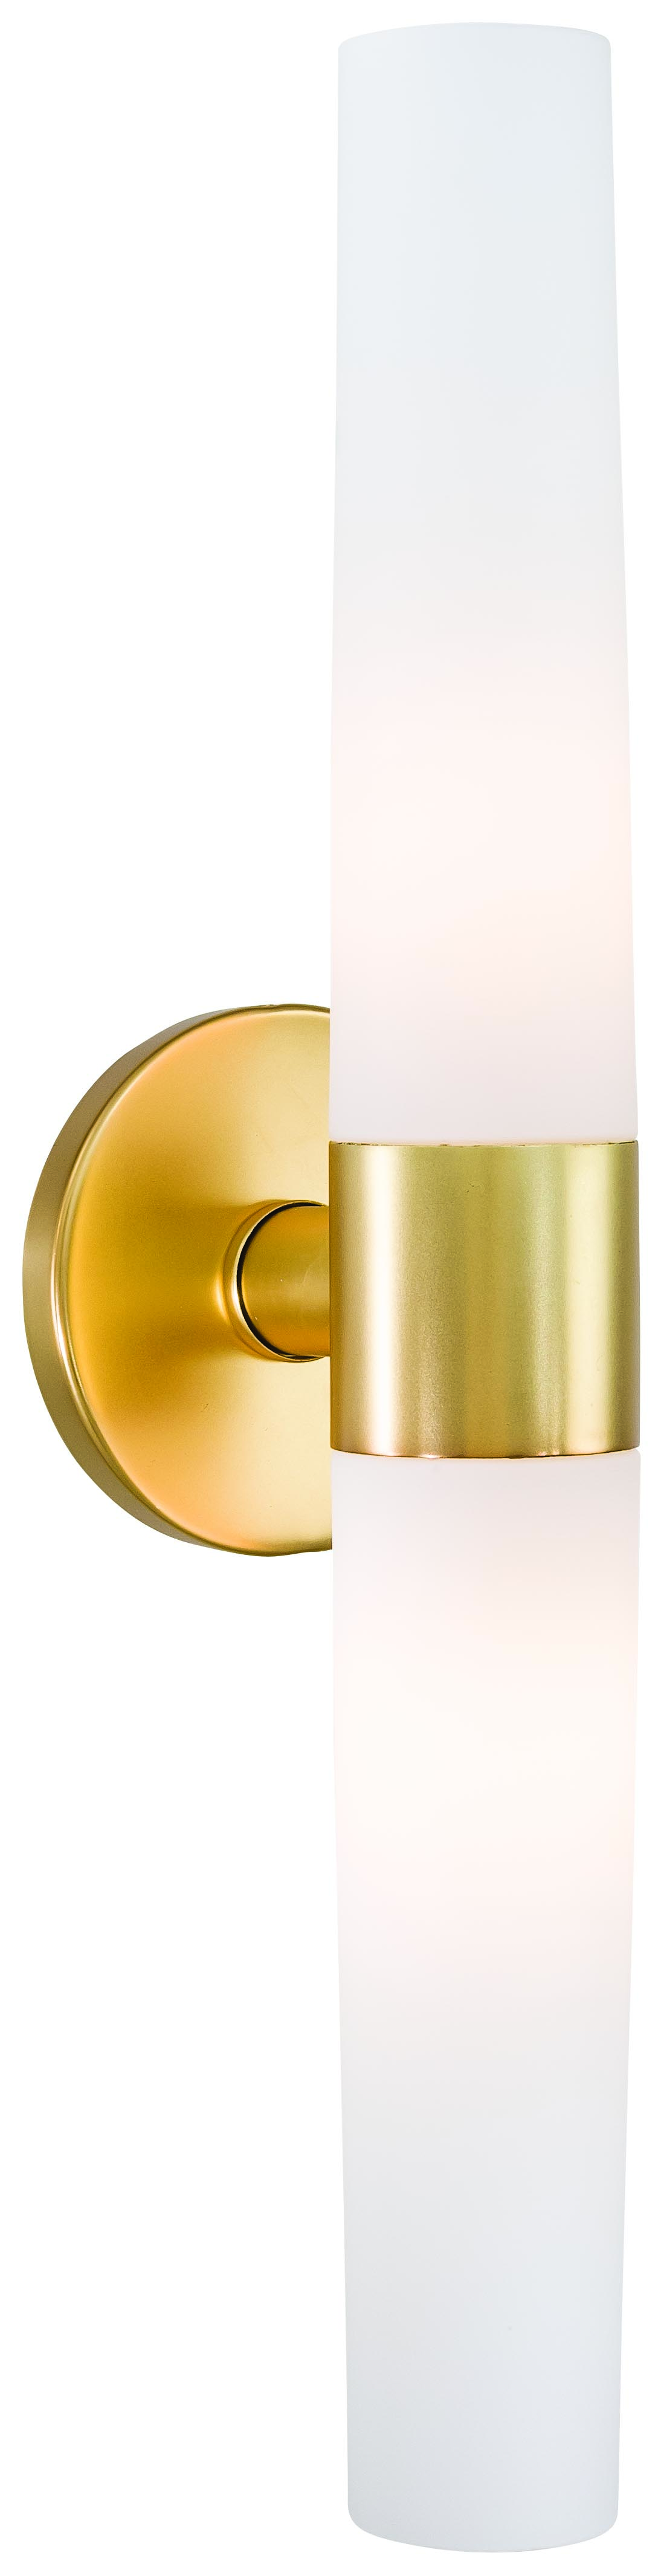 George Kovacs Saber Light Bathroom Fixture in Honey Gold, P5042-248 The  Light Brothers